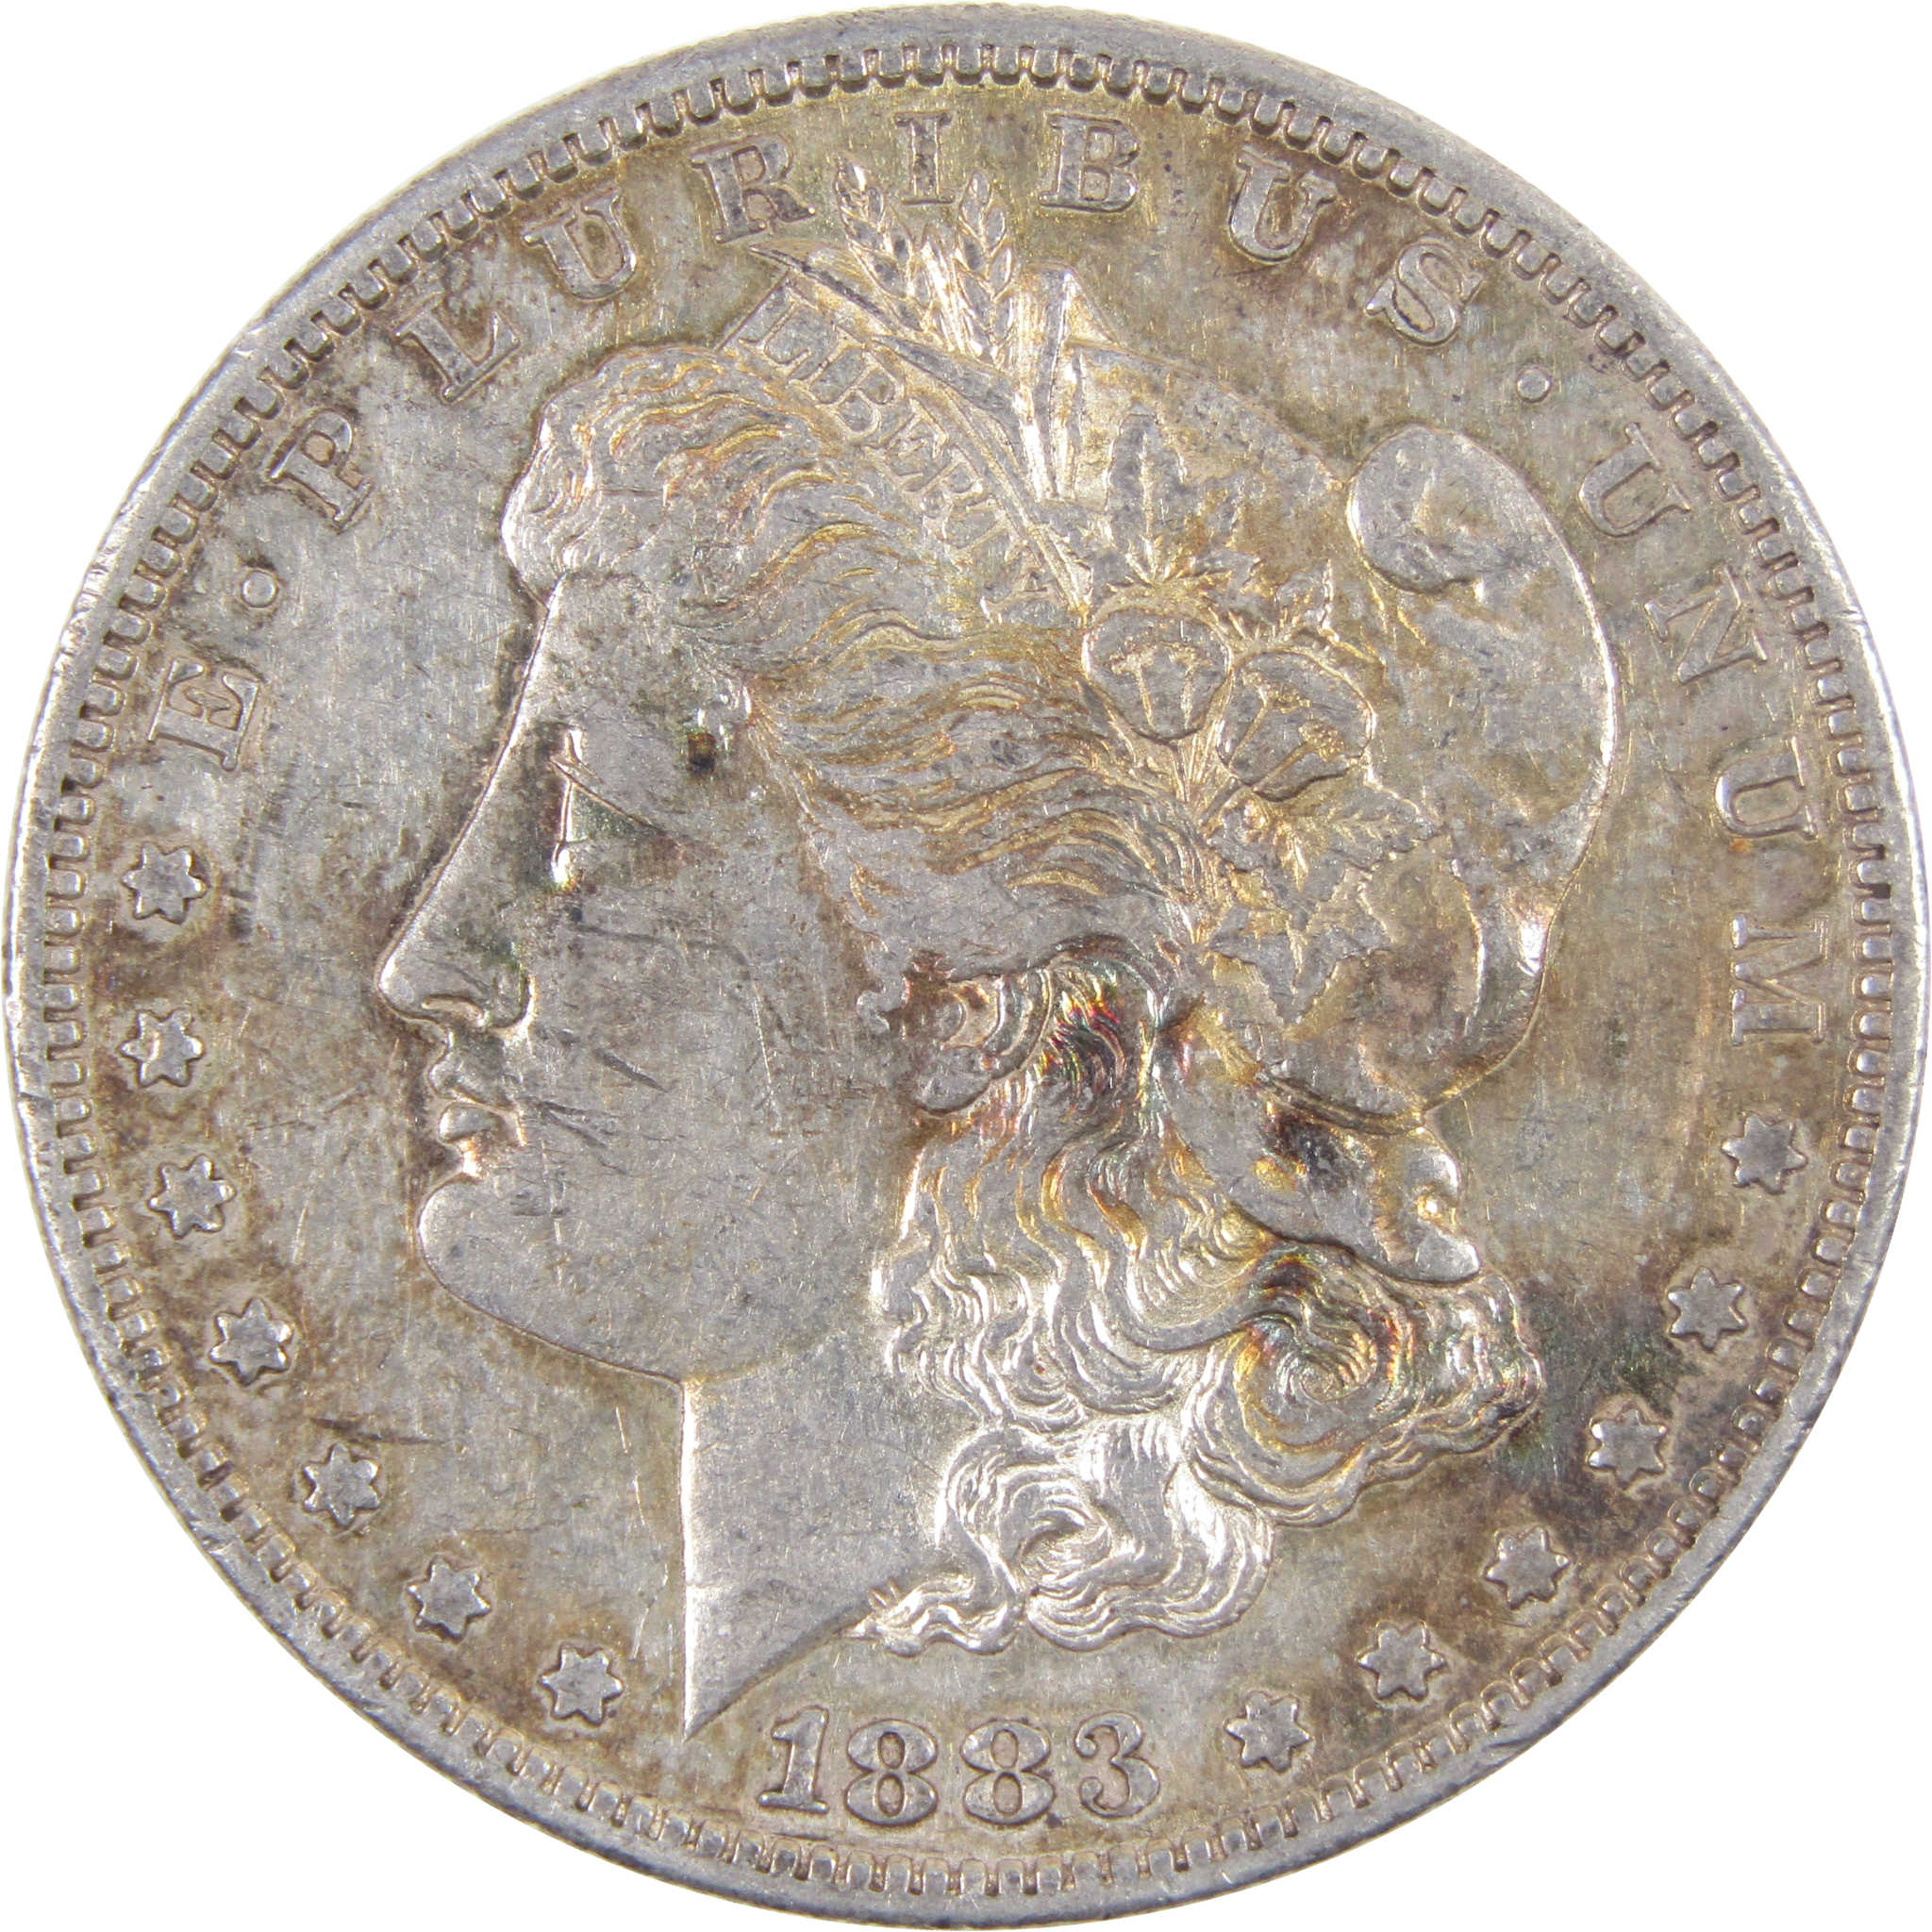 1883 S Morgan Dollar XF EF Extremely Fine 90% Silver Coin SKU:I2906 - Morgan coin - Morgan silver dollar - Morgan silver dollar for sale - Profile Coins &amp; Collectibles